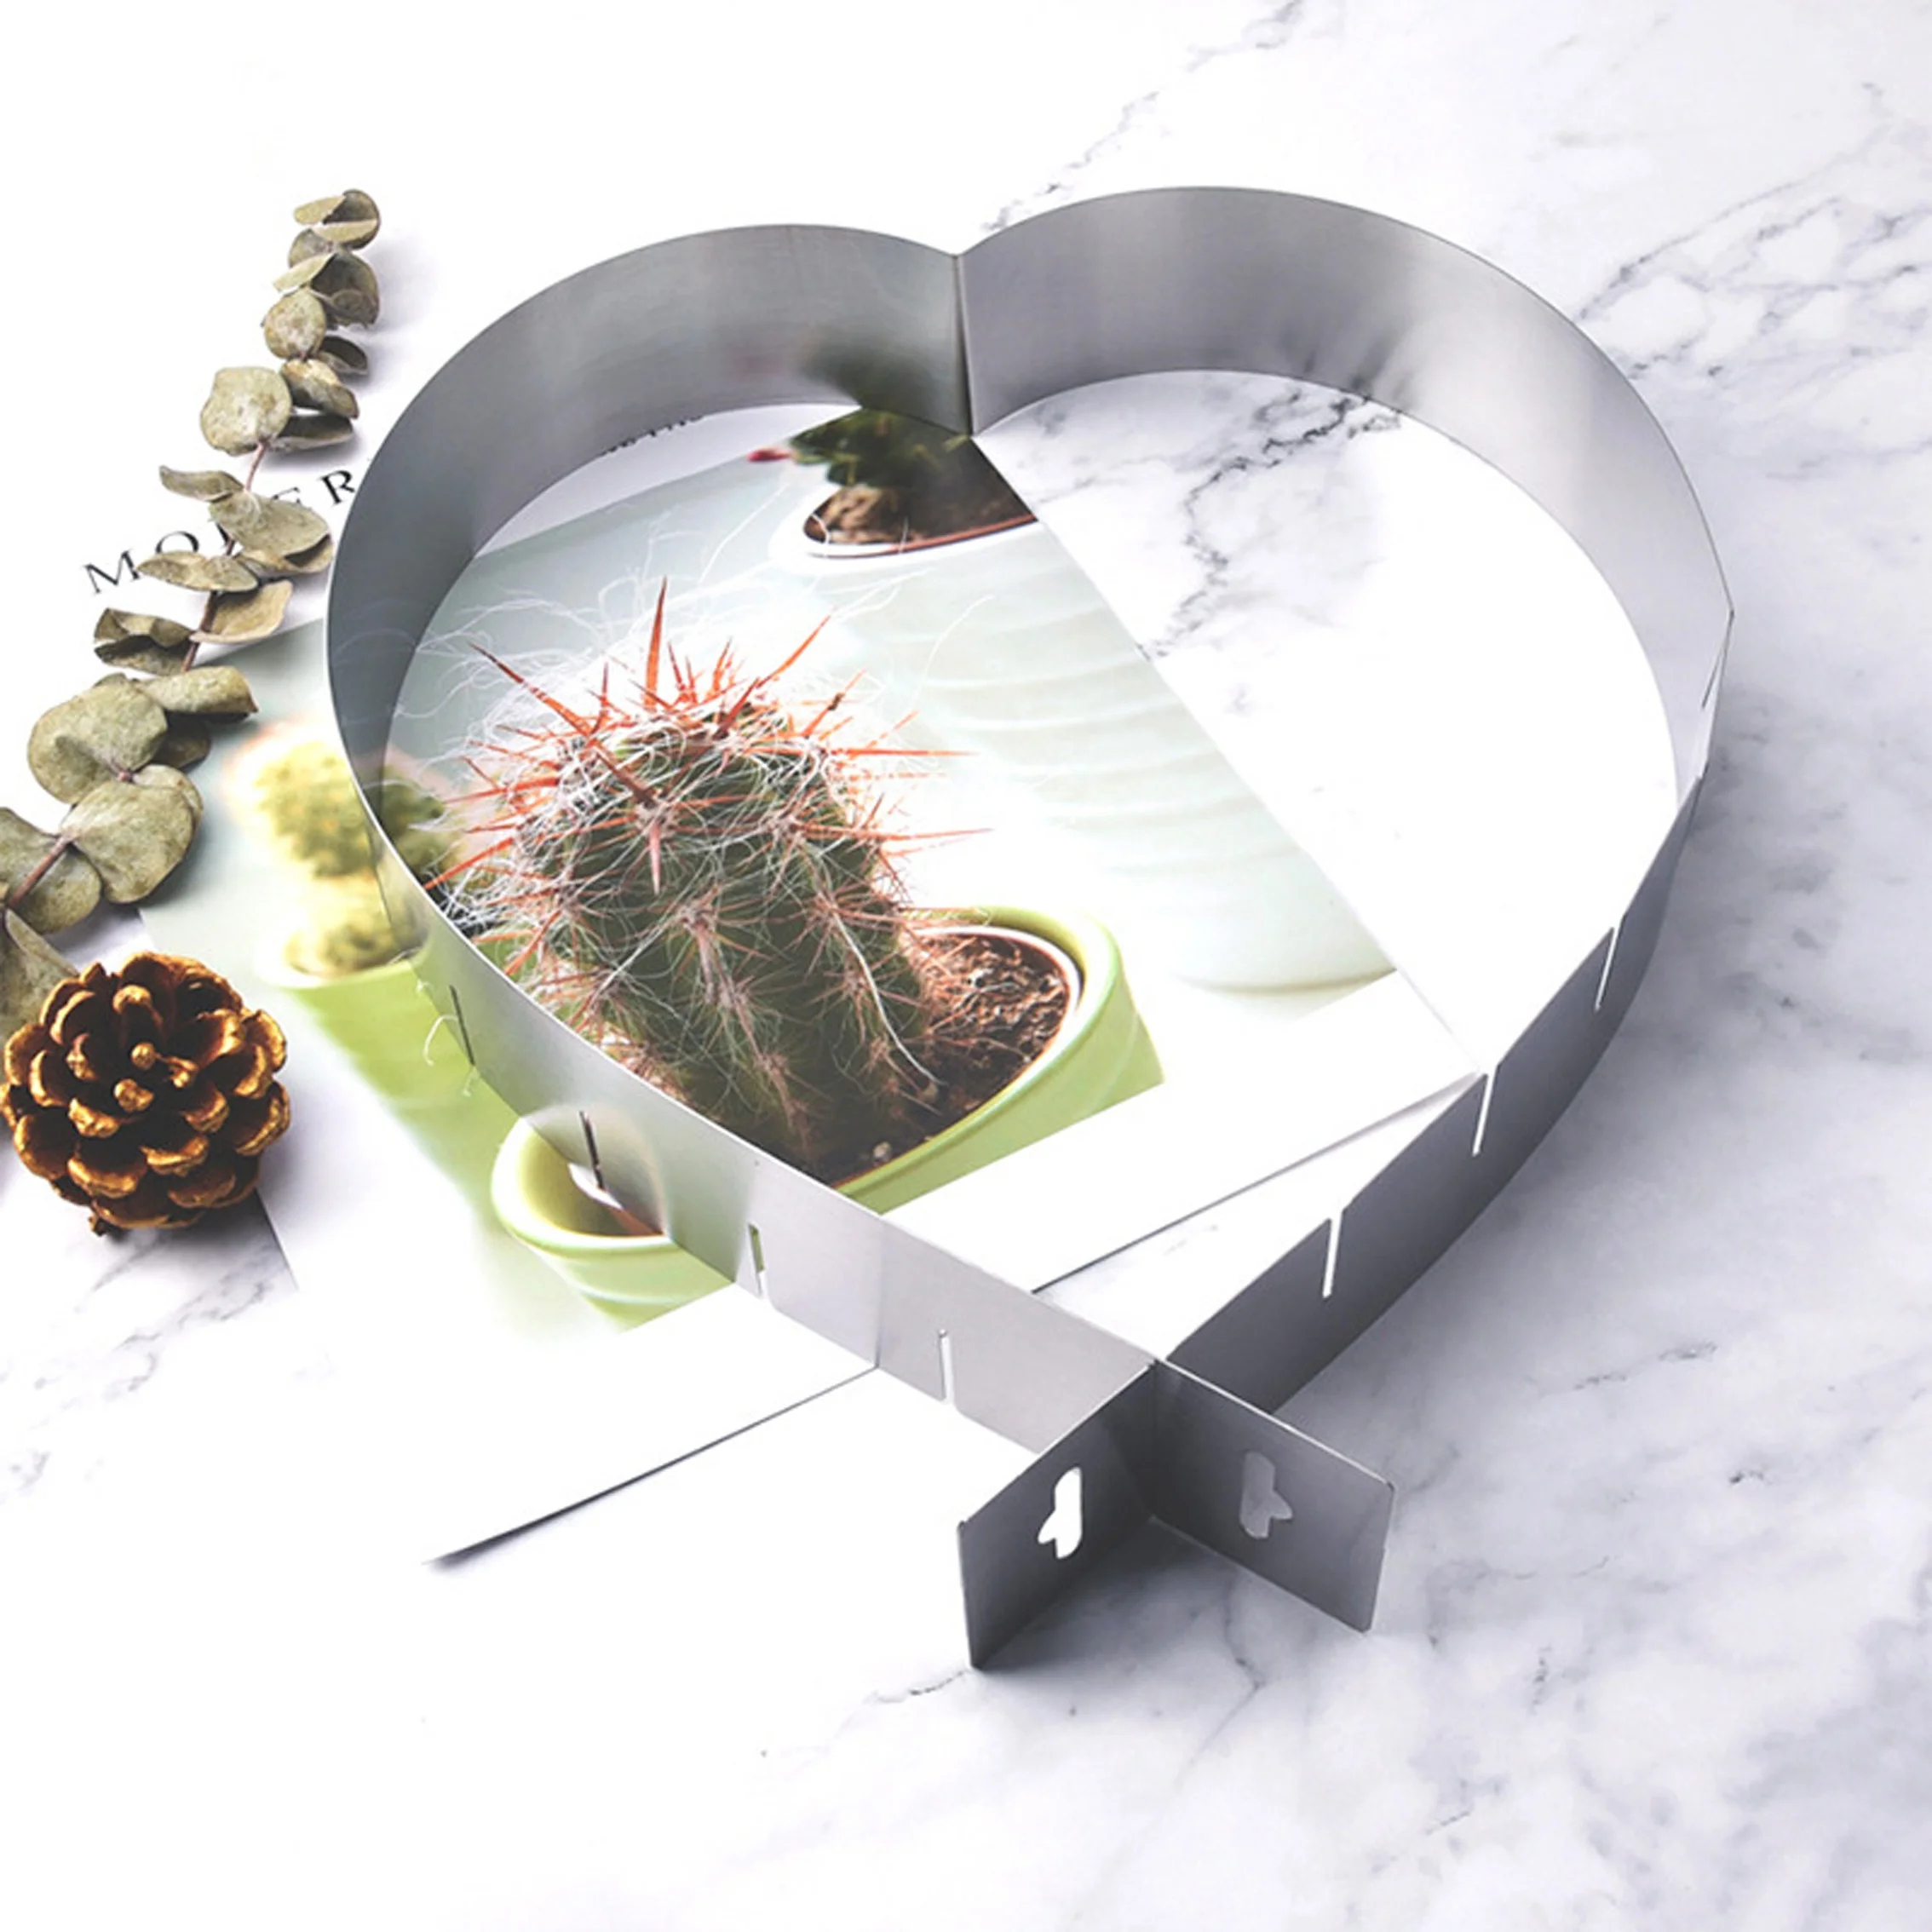 Hot Selling Adjustable Stainless Steel Heart Shaped Ring Baking Mold Mousse Cake Cutting Kitchen Accessories